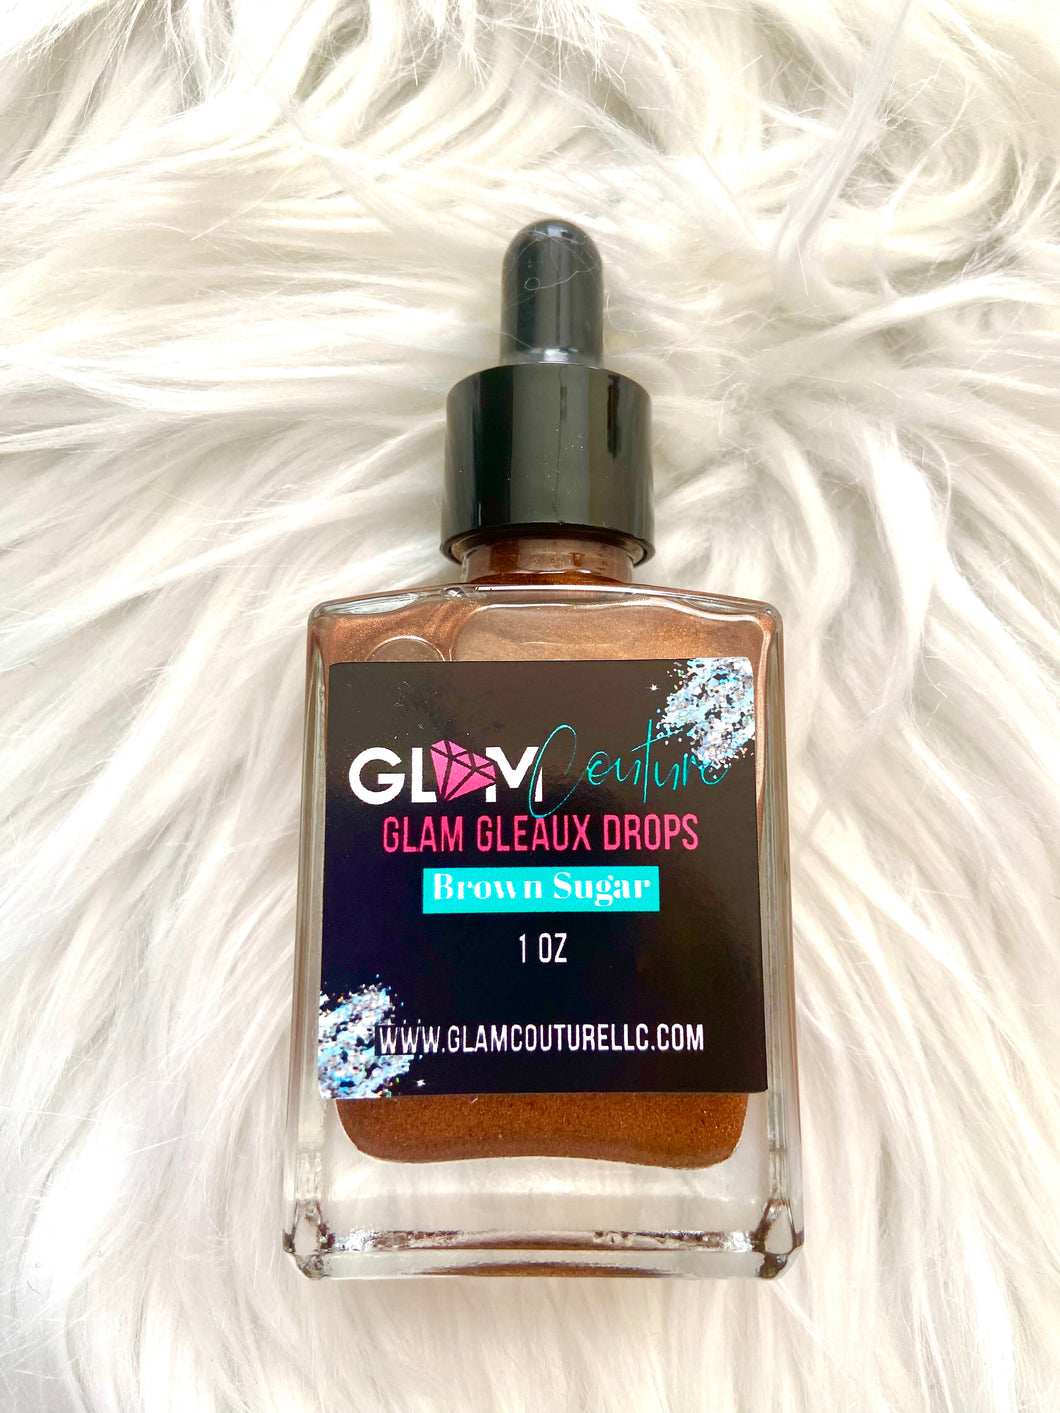 Glam Couture Body Care™ - Glam Gleaux Drops